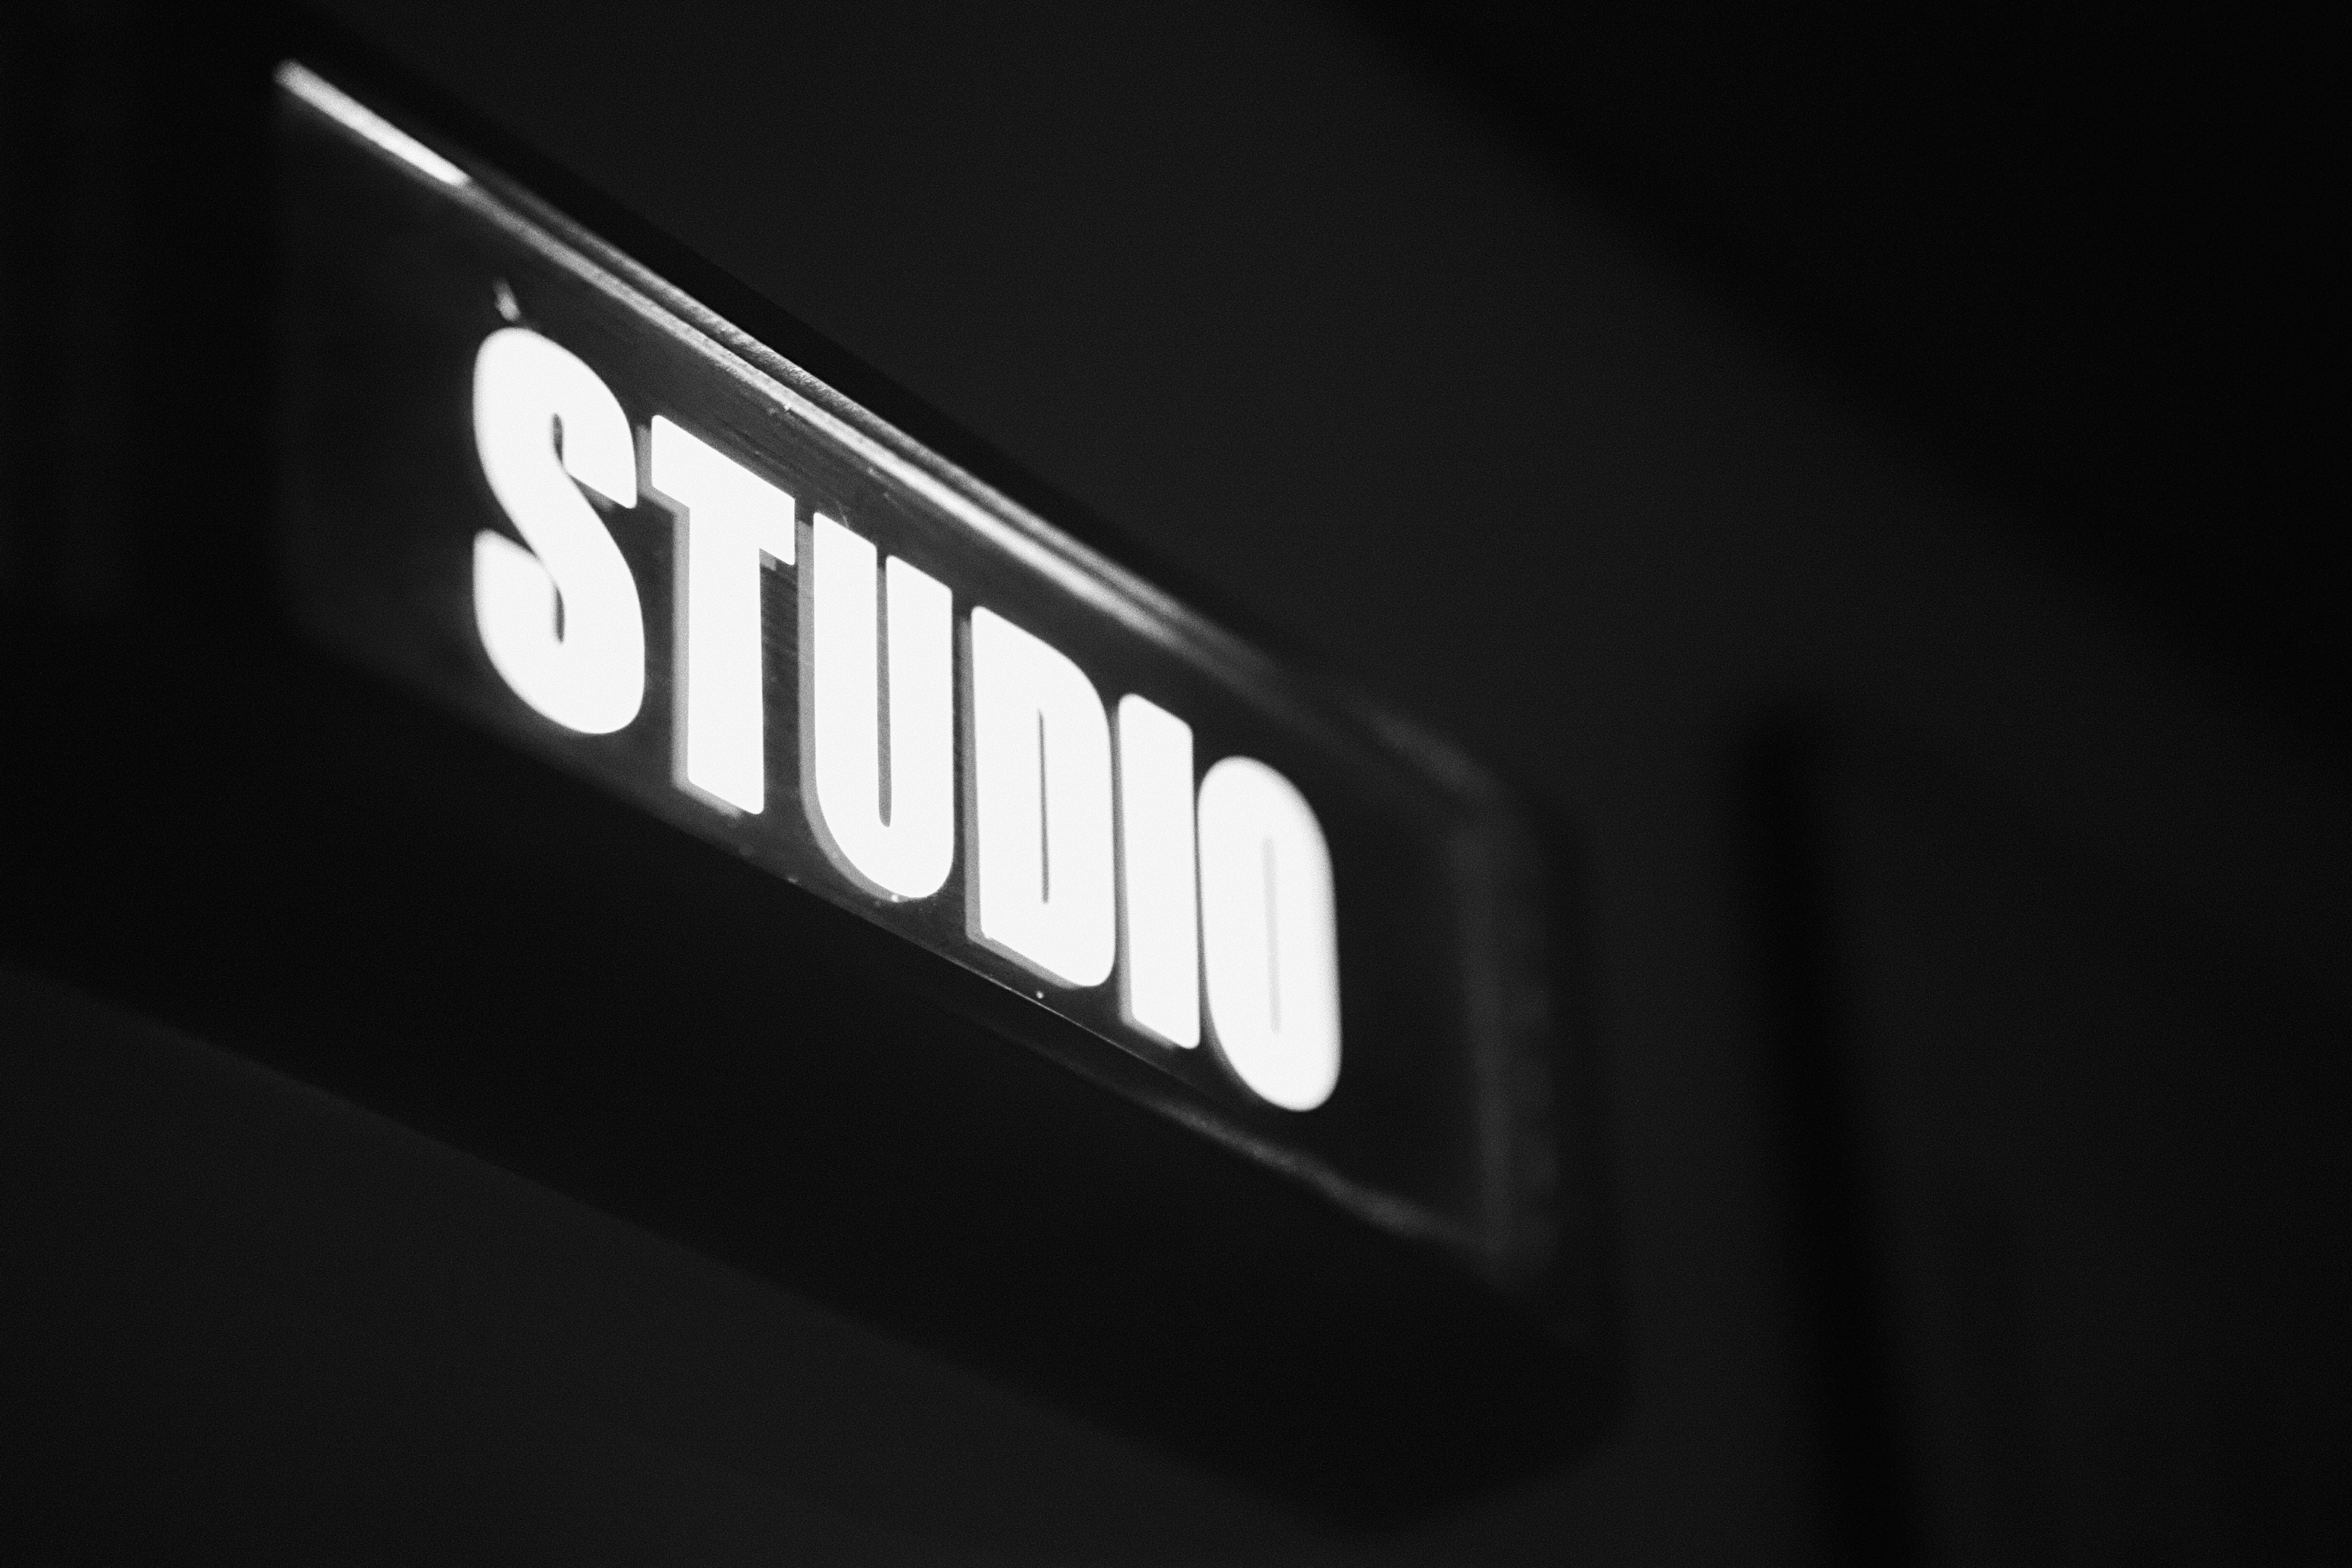 Studio, text, viewers to subscribe.